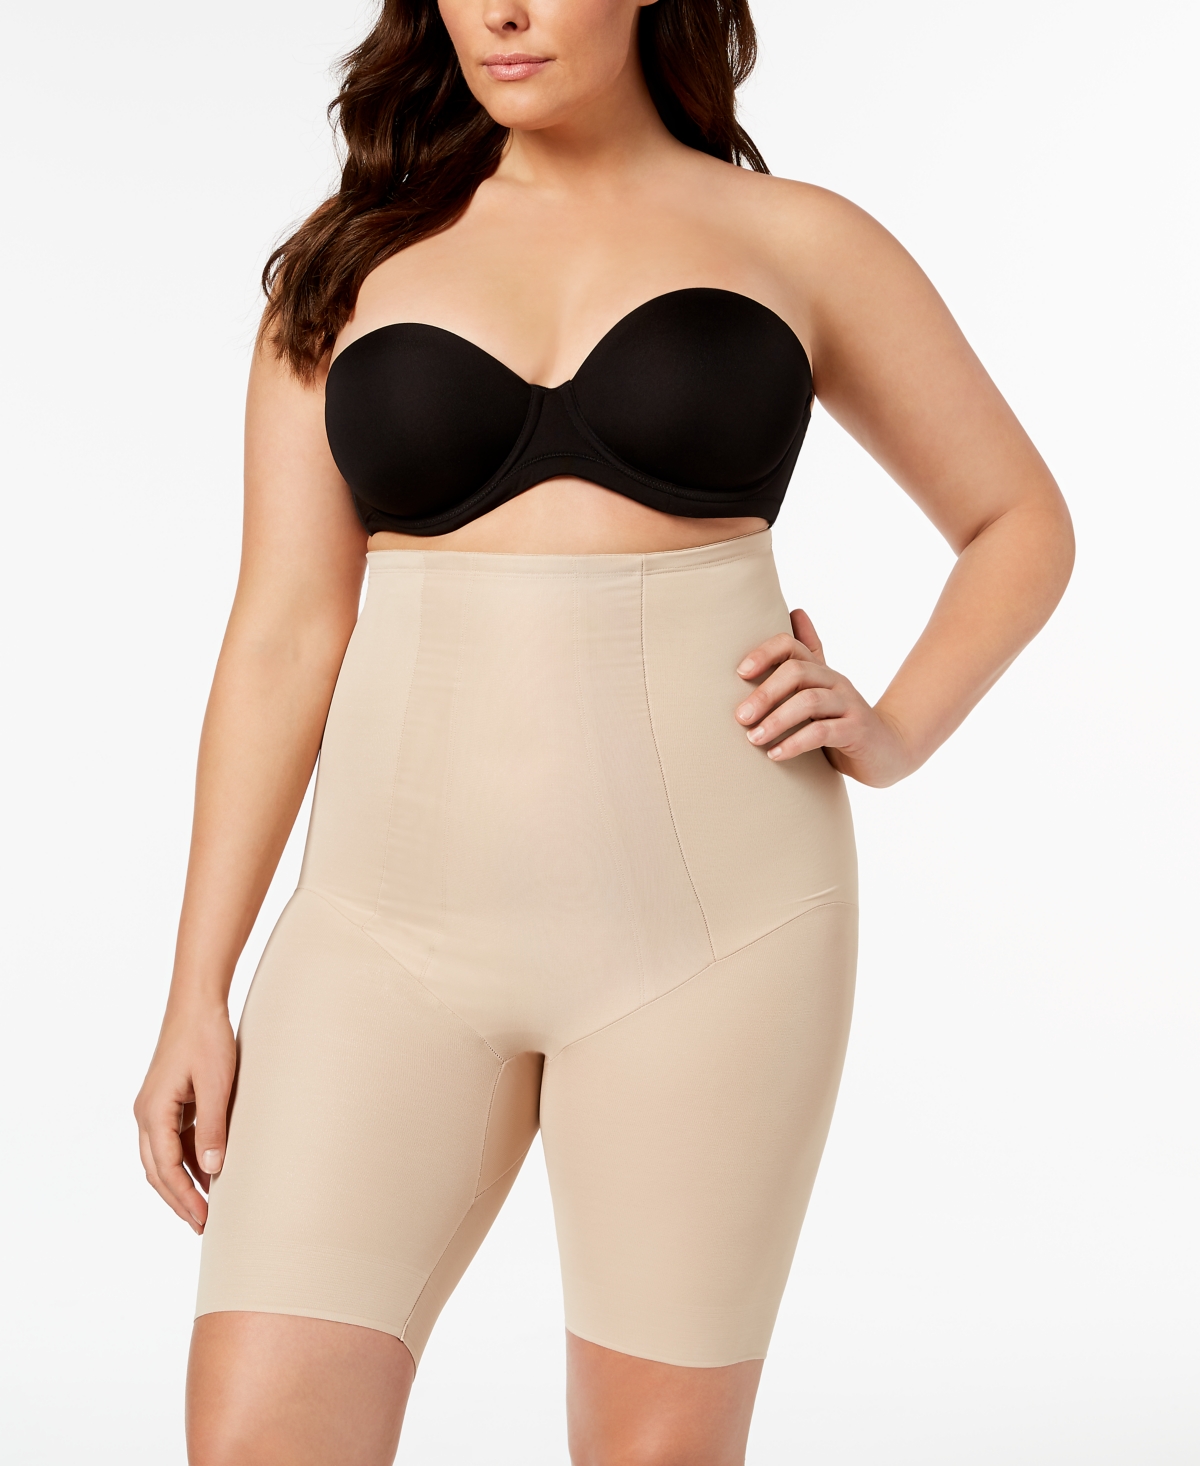 UPC 080225103243 product image for Miraclesuit Extra Firm Tummy-Control High Waist Thigh Slimmer 2709 | upcitemdb.com